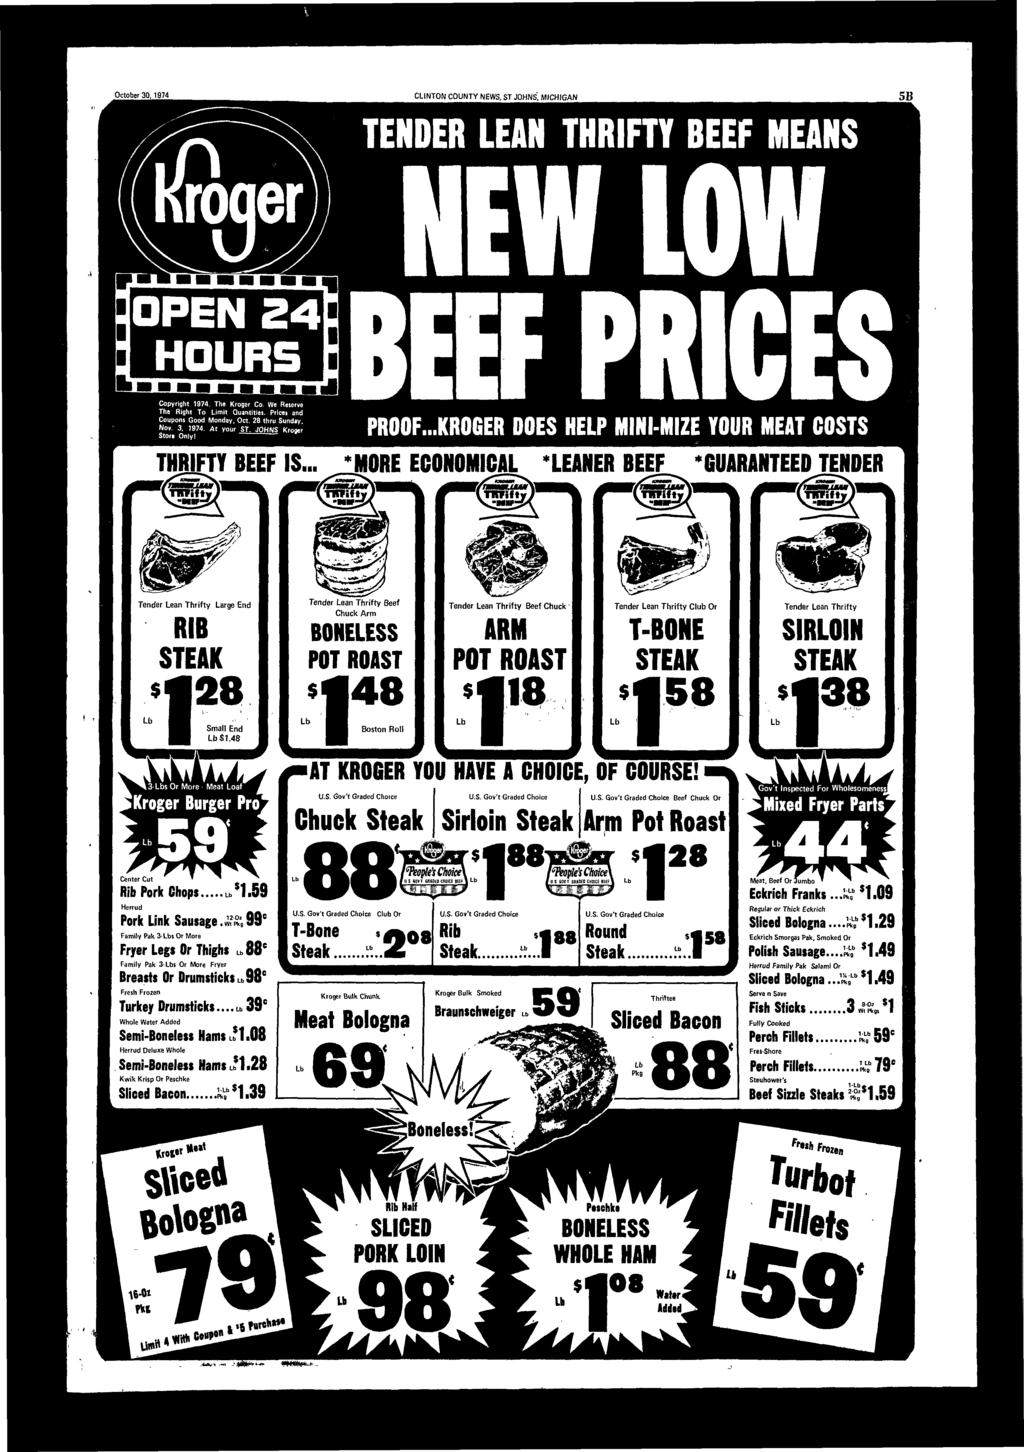 October 30,1974 CLINTON COUNTY NEWS, ST JOHNS, MICHIGAN 5B TENER LEAN THRIFTY BEEF MEANS I I I OPEN 24 H0UR5 1 I I I I I I» Copyright 1974. The Kroger Co. We Reserve The Right To Limit Quntities.